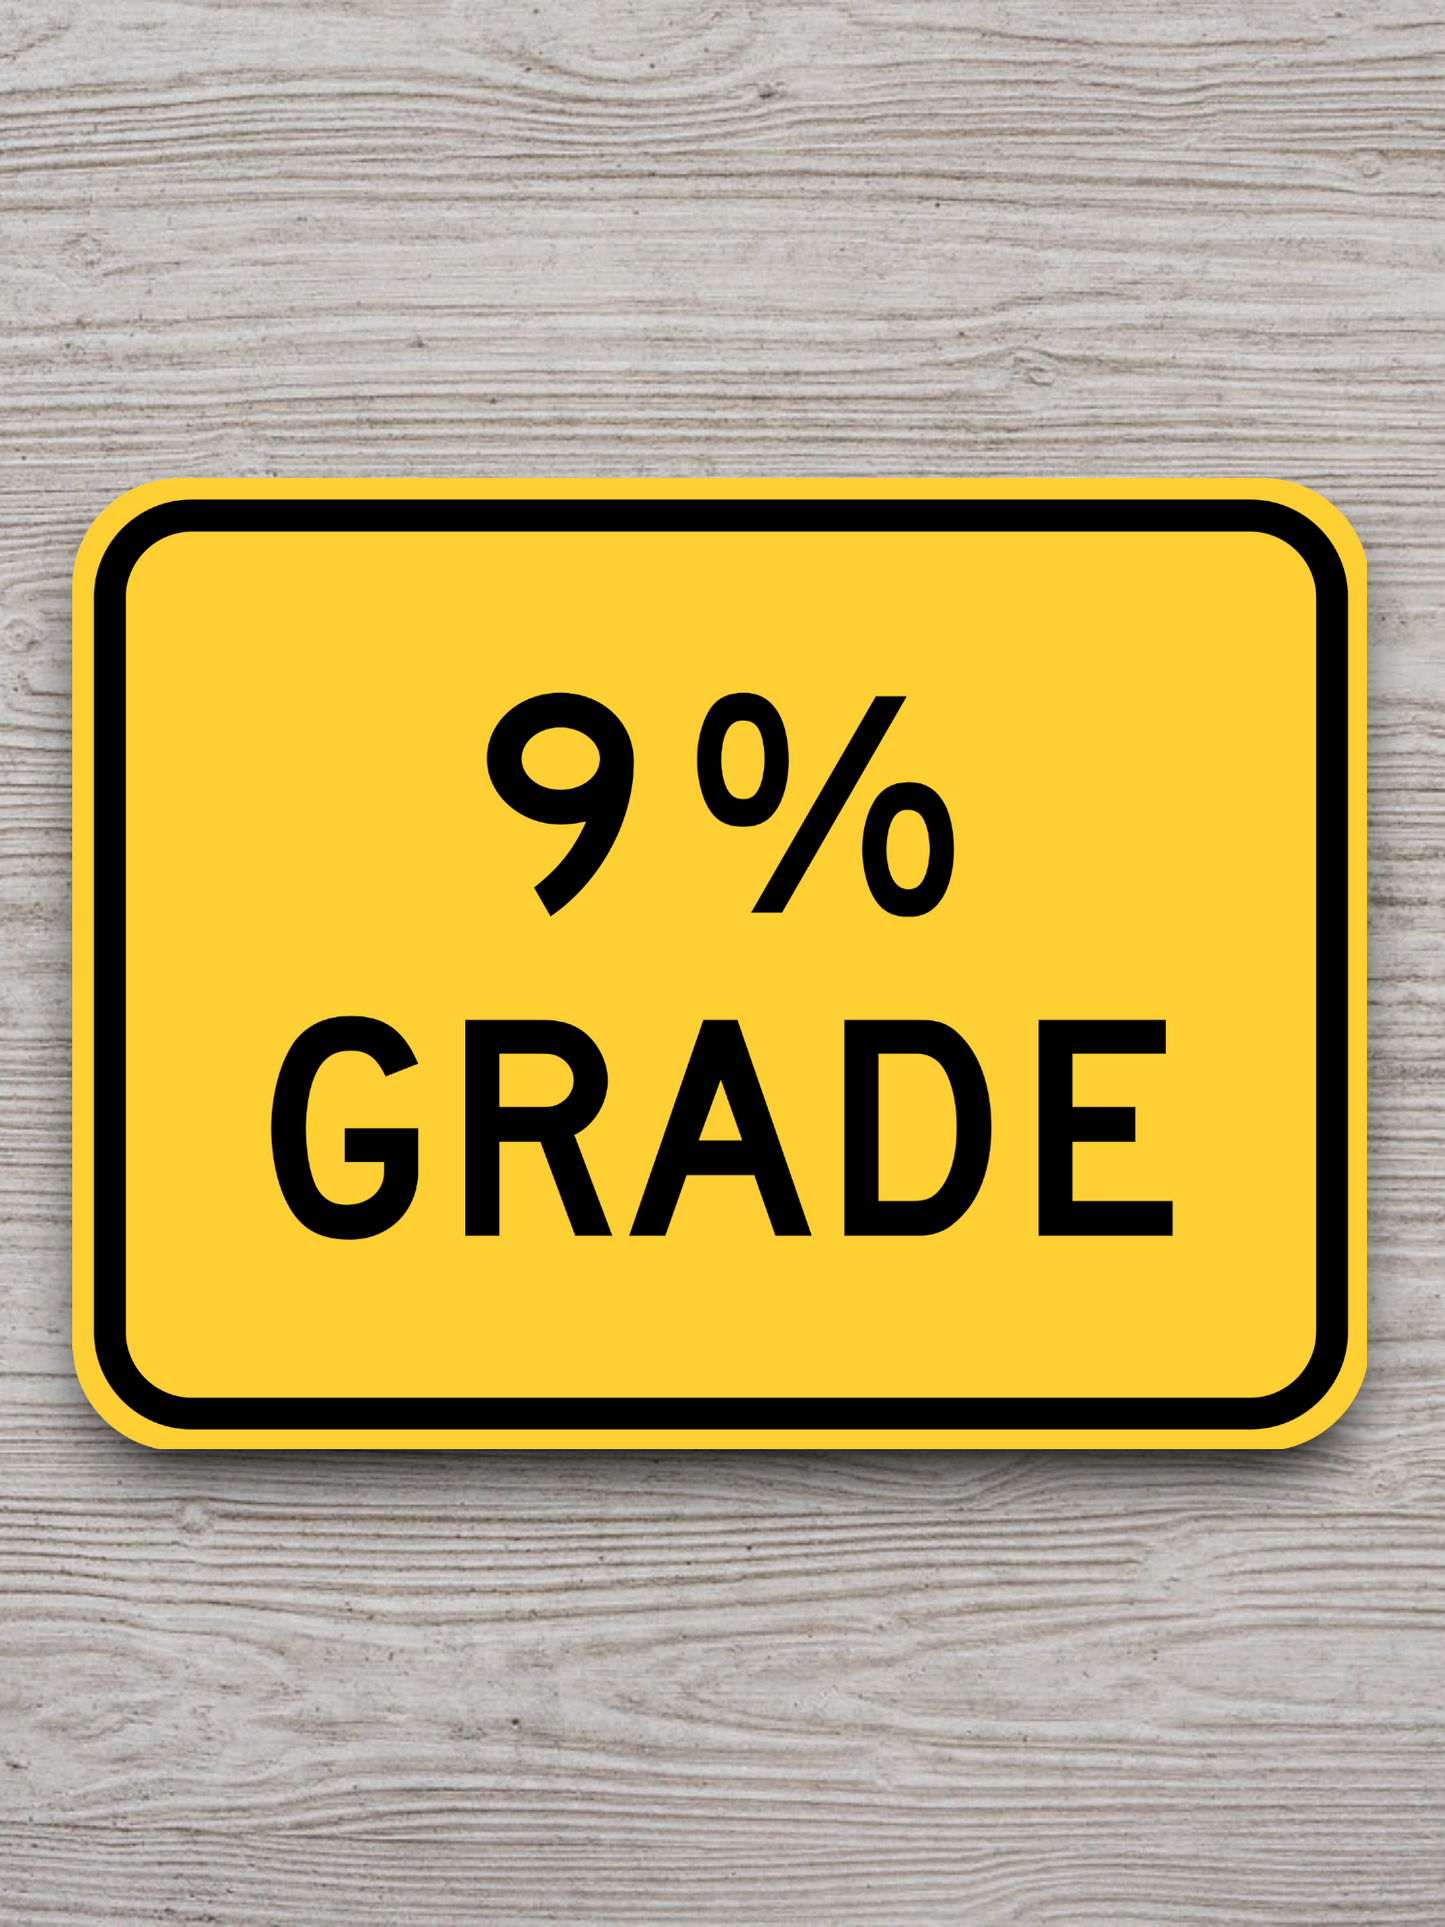 9% grade ahead United States Road Sign Sticker